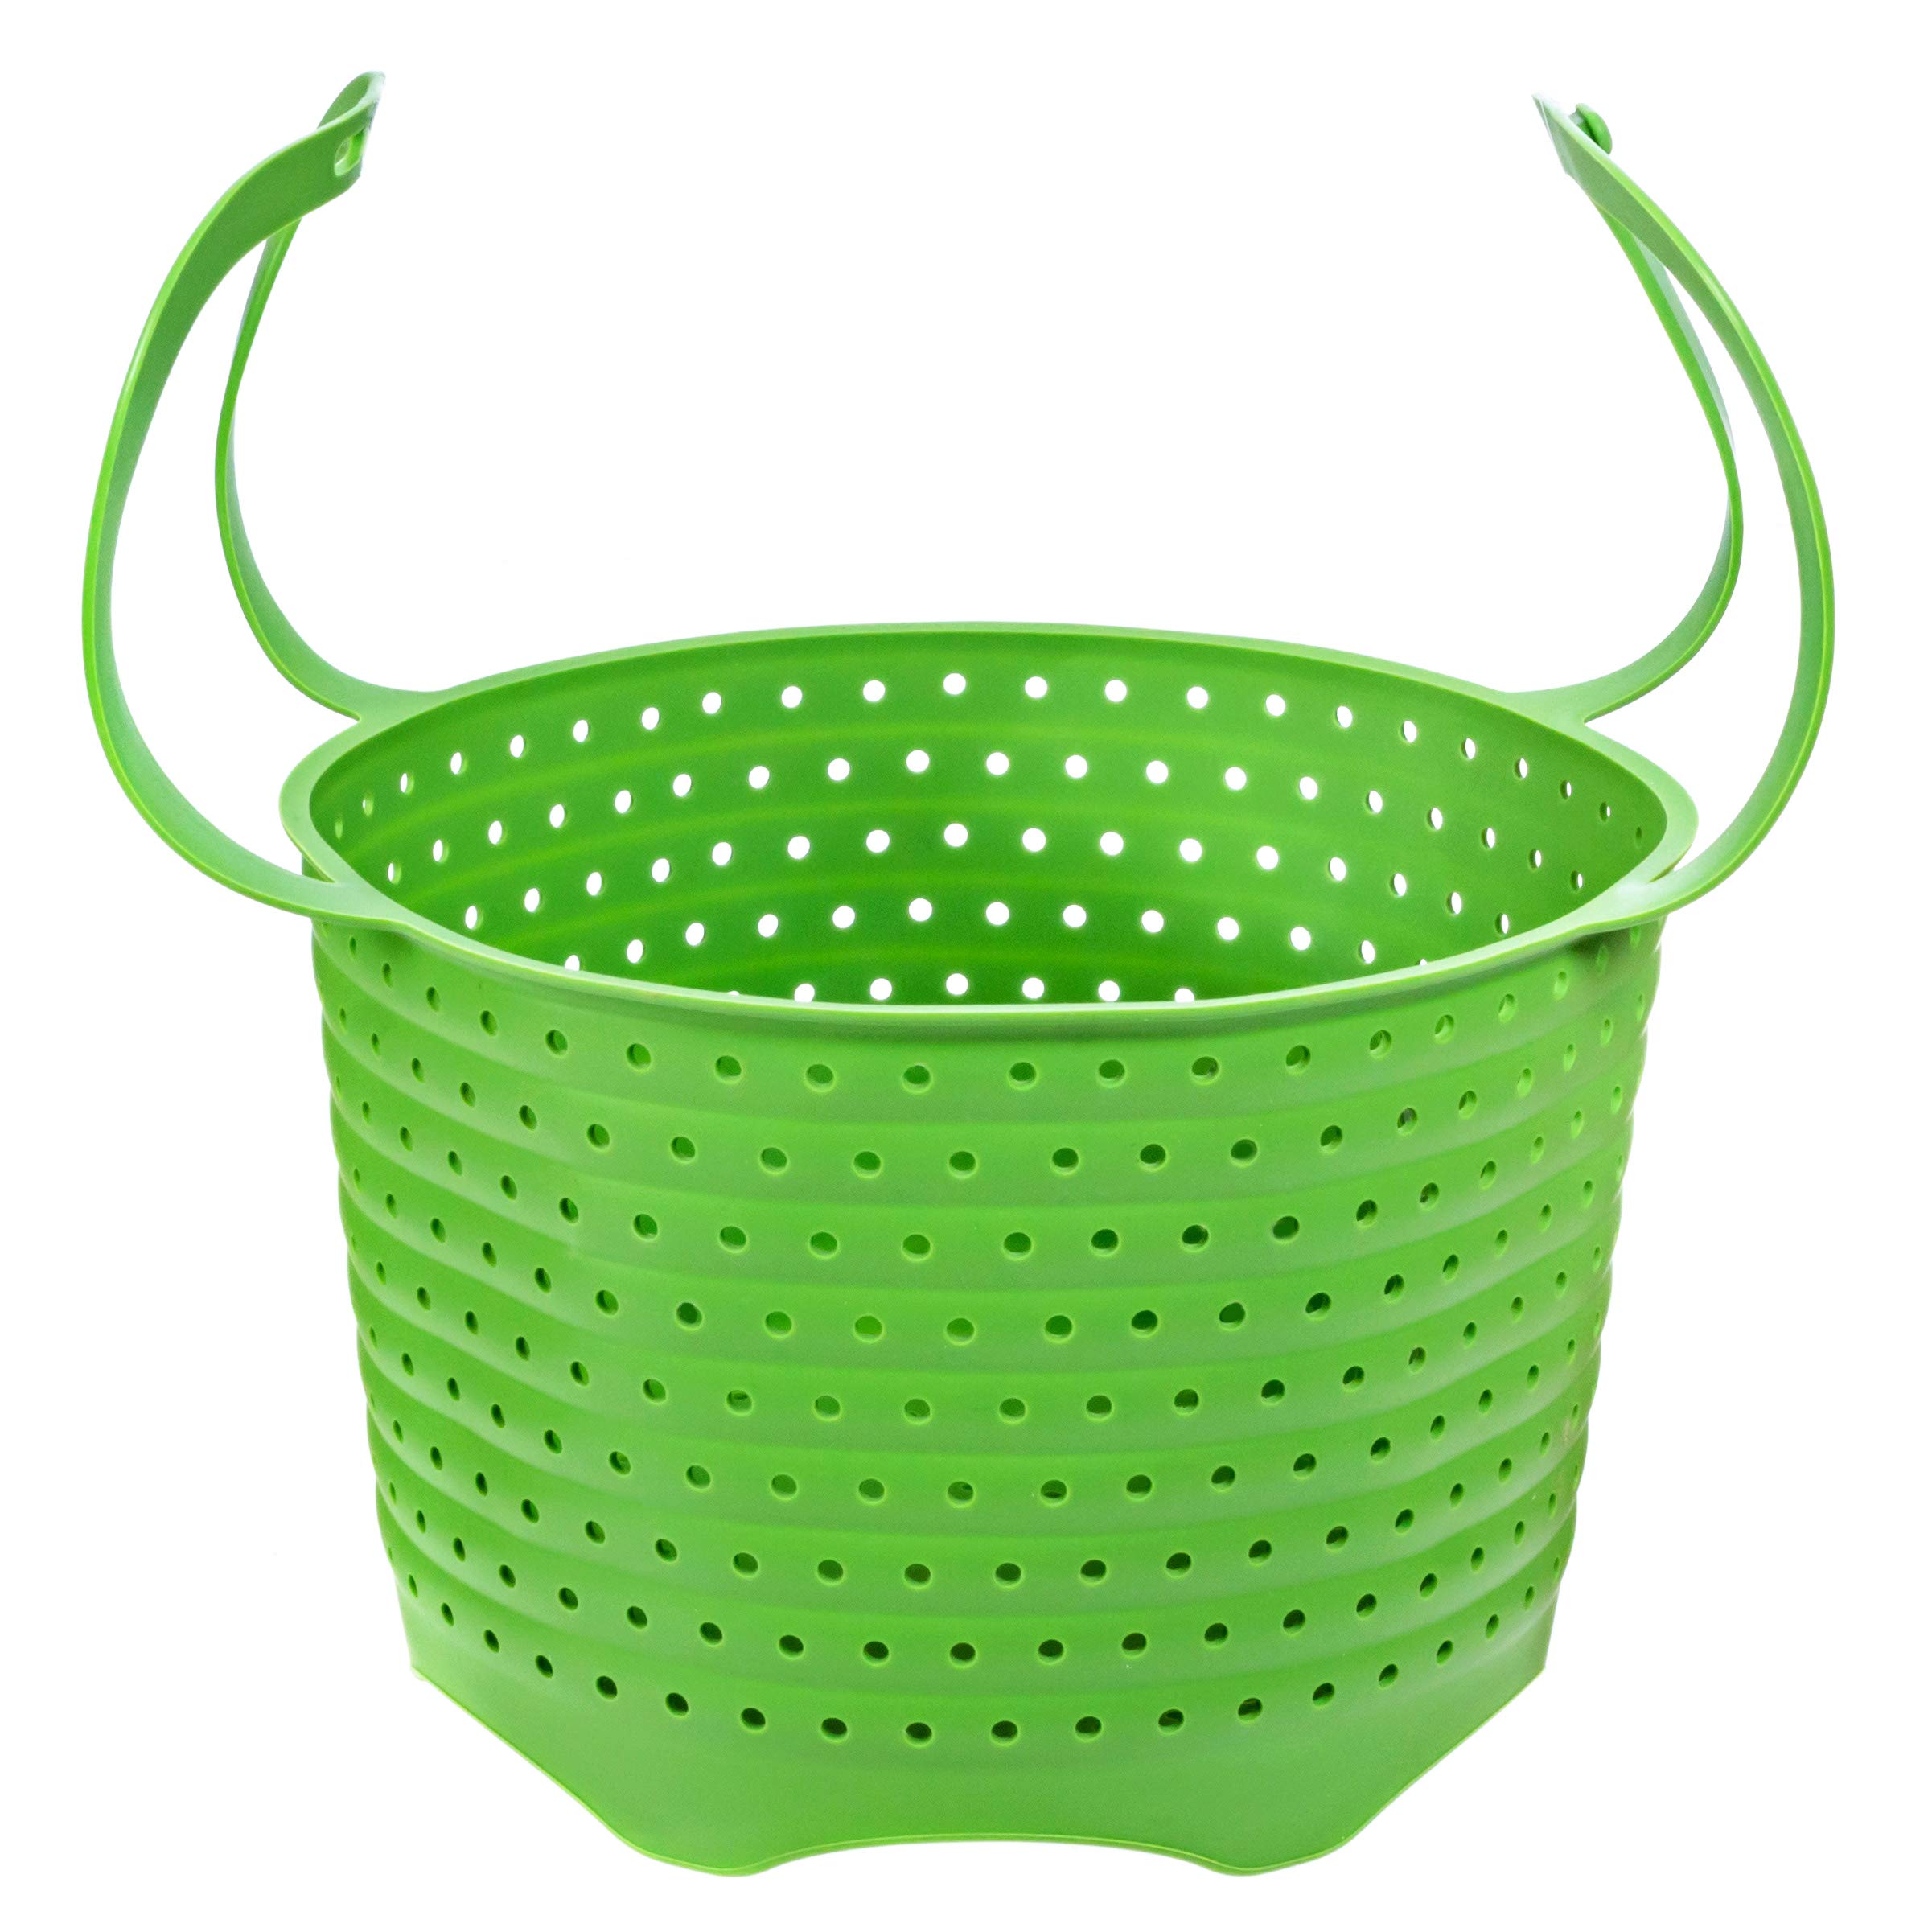 Silicone Steamer Basket | Foldable, Space-Saving | Fits 6,8 Qt Instant Pot and Similar-Sized Pressure Cookers Accessories